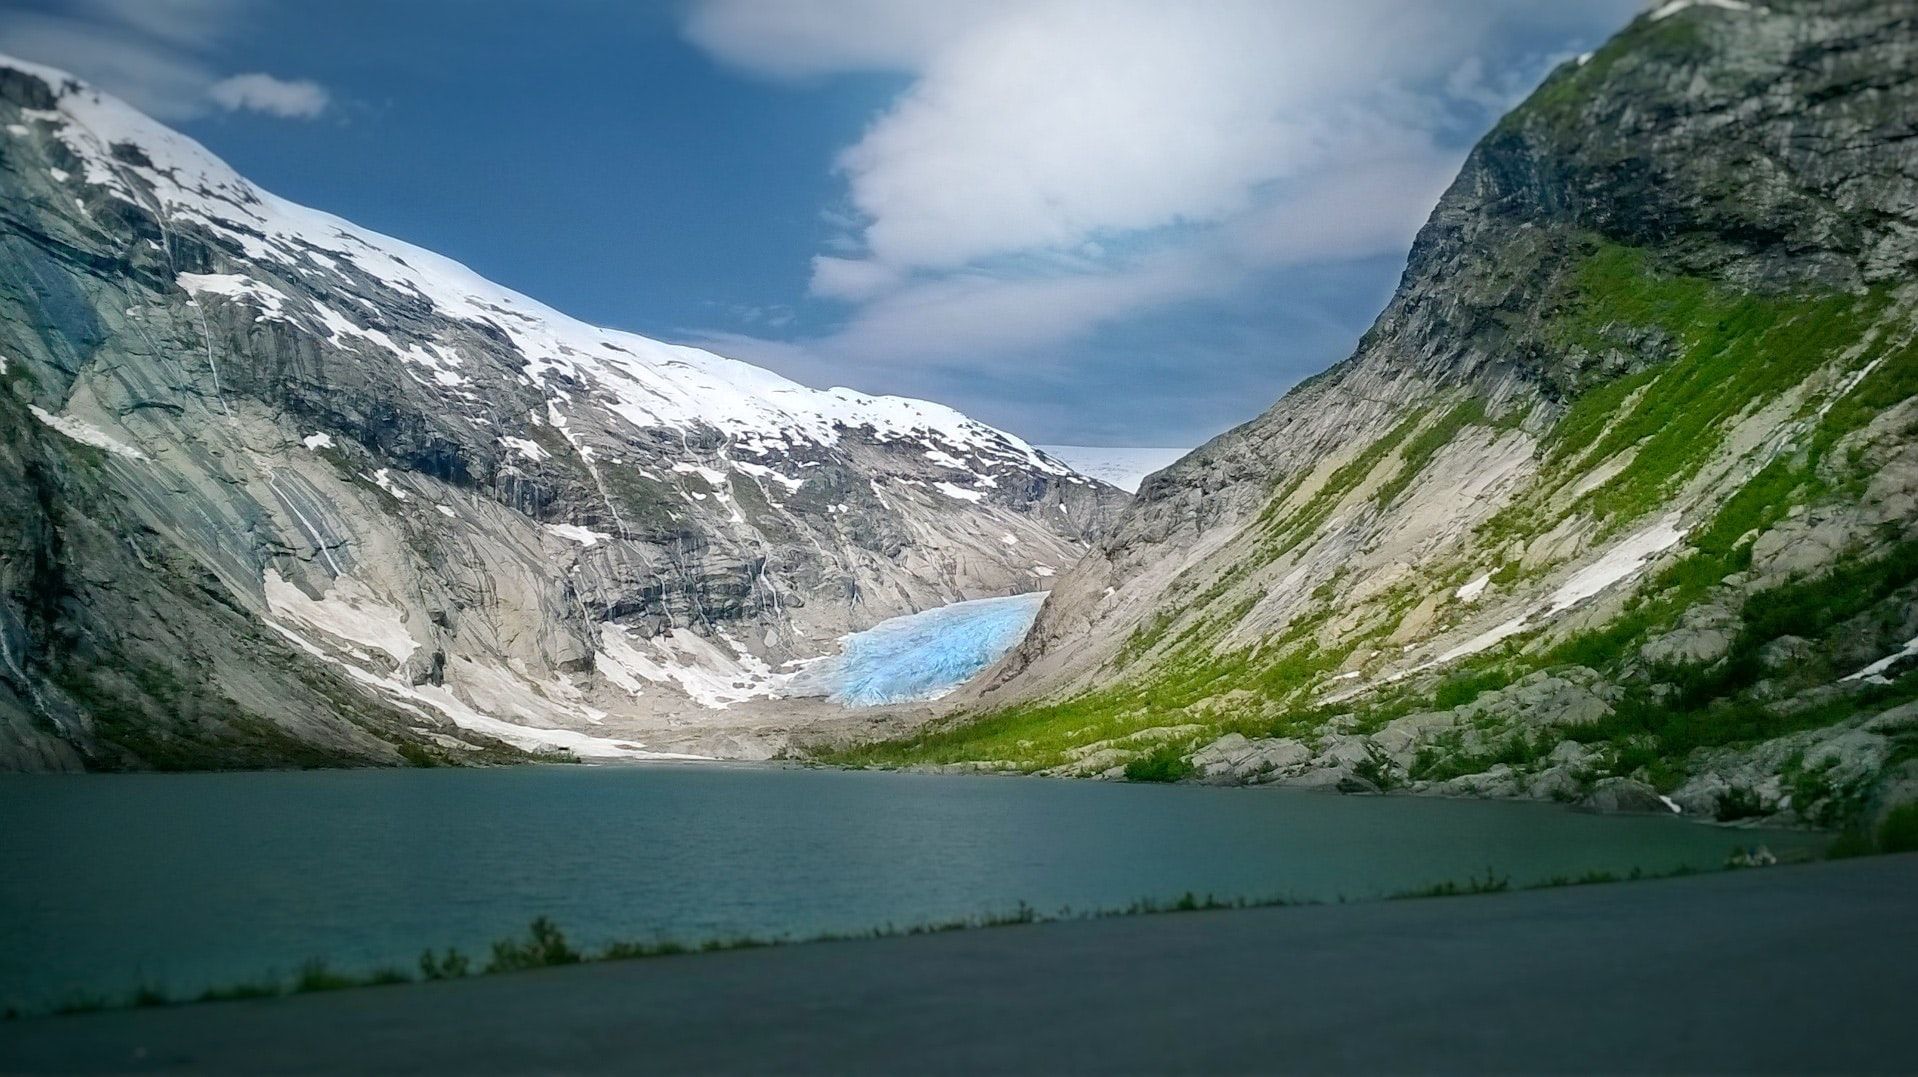 A lake meets a glacier on a stunning Norwegian fjord.